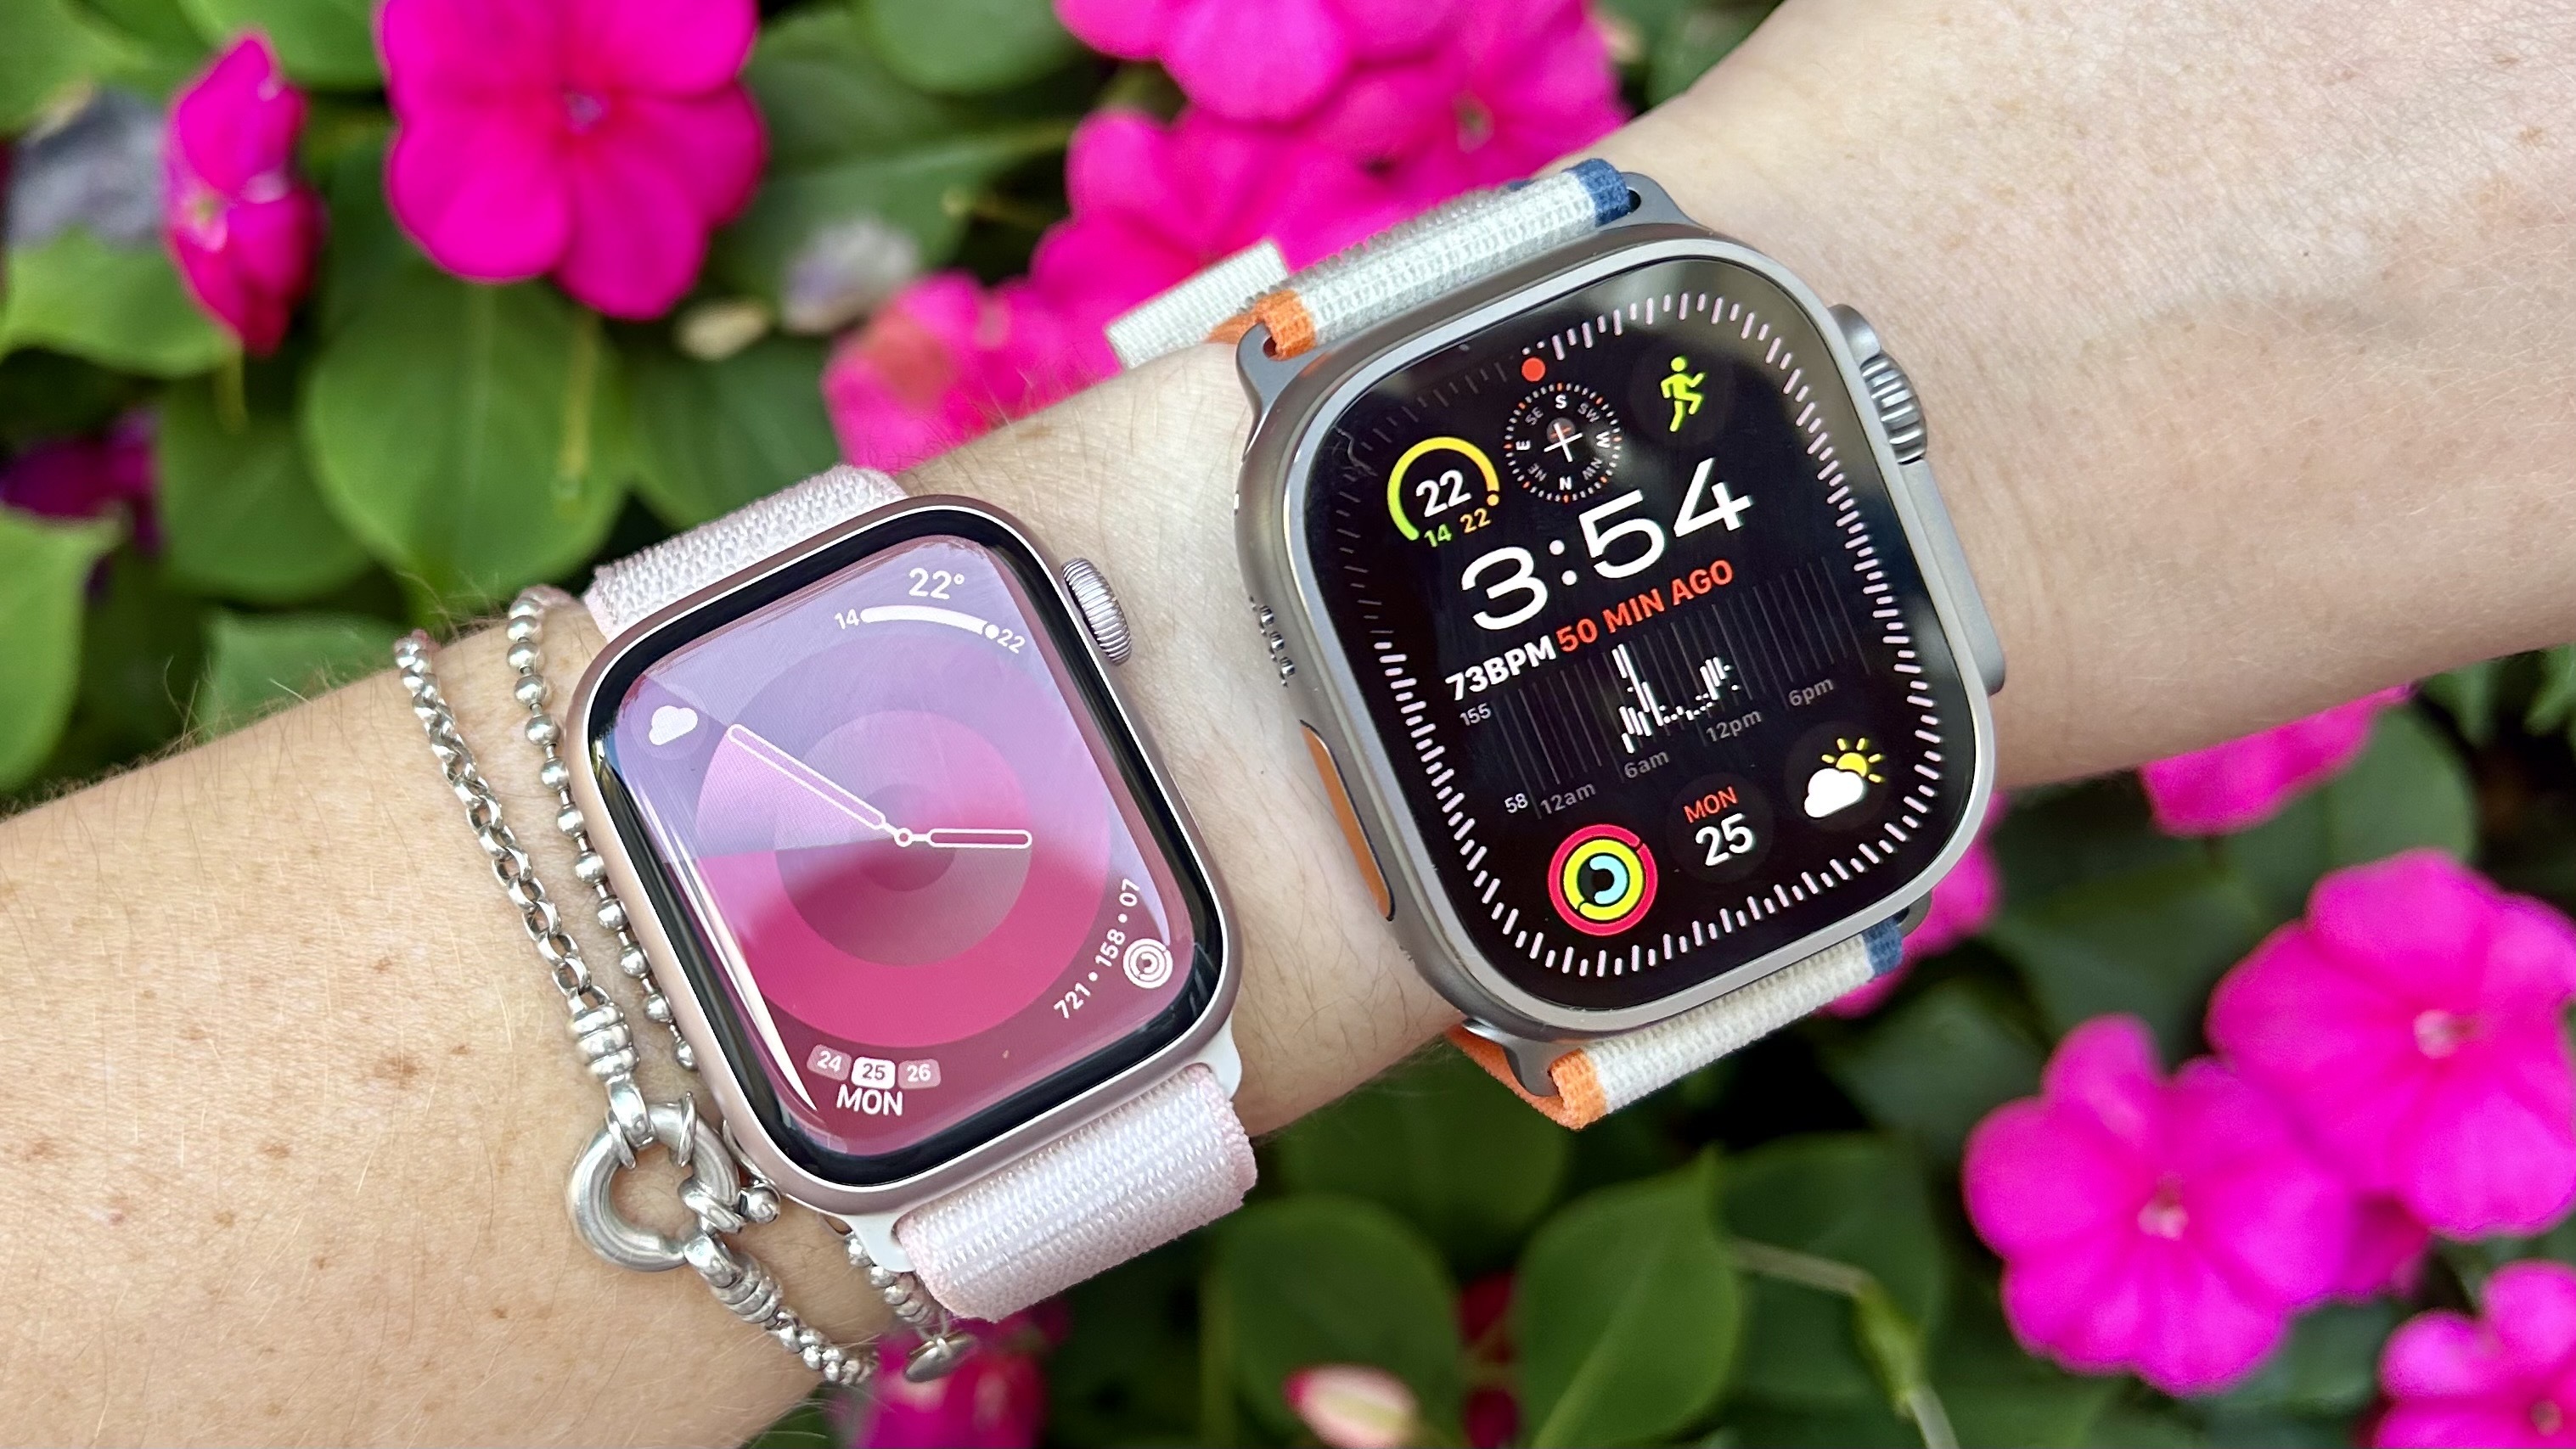 Apple Watch sales ban has begun — what you need to know